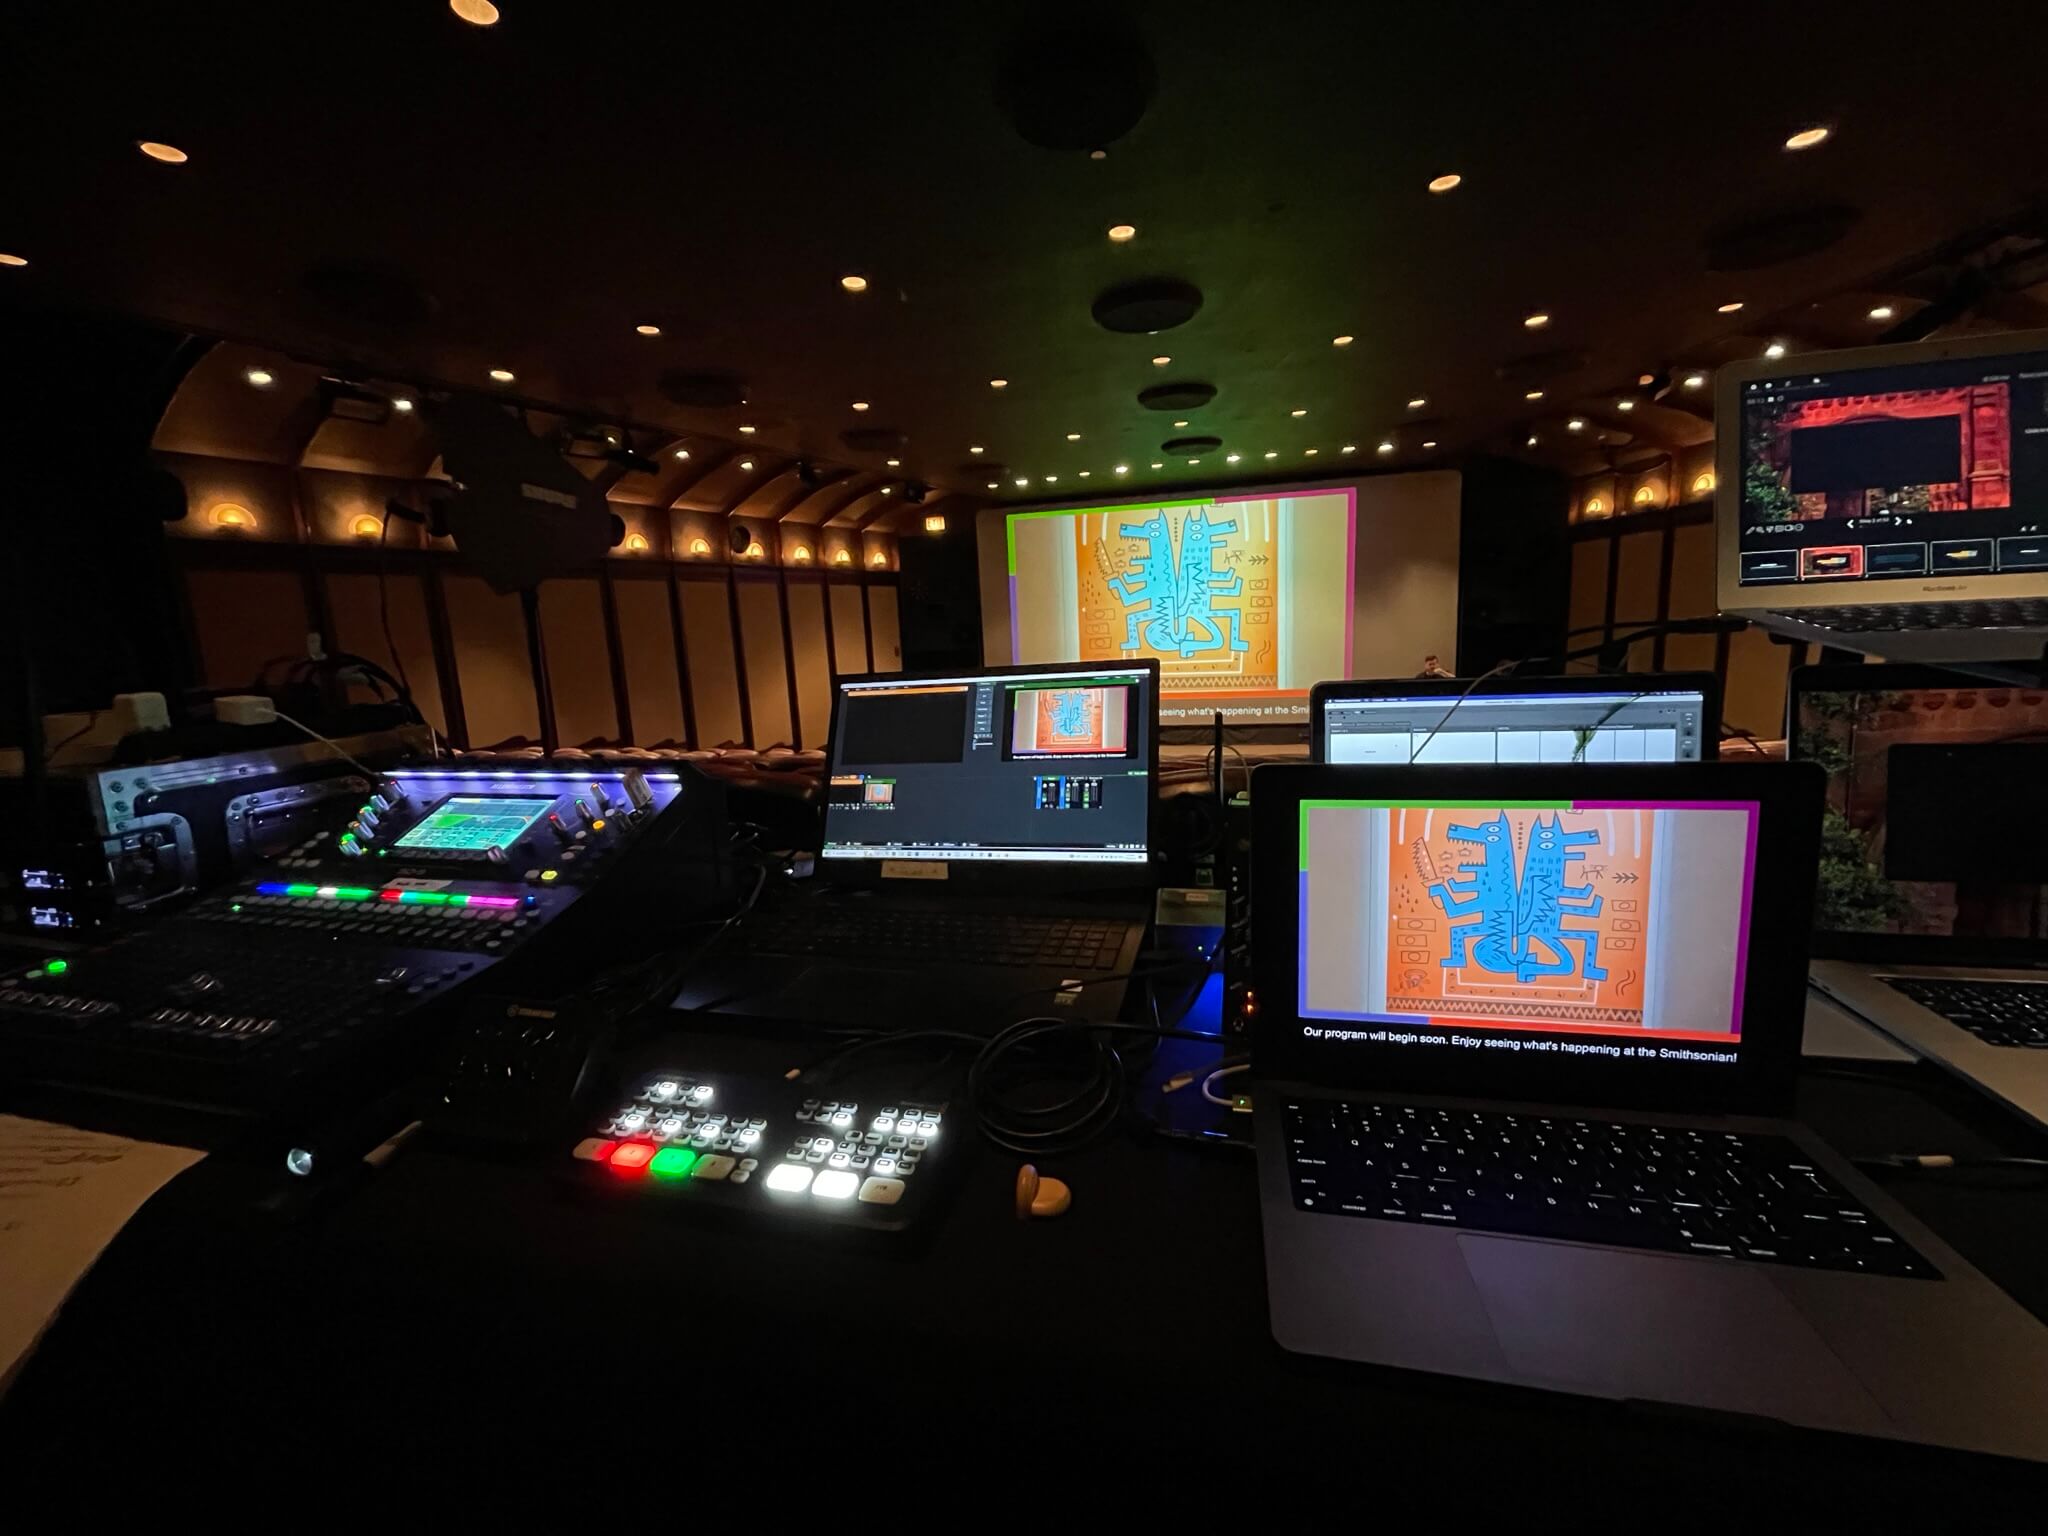 Control room with multiple monitors and lighting equipment during a live performance.